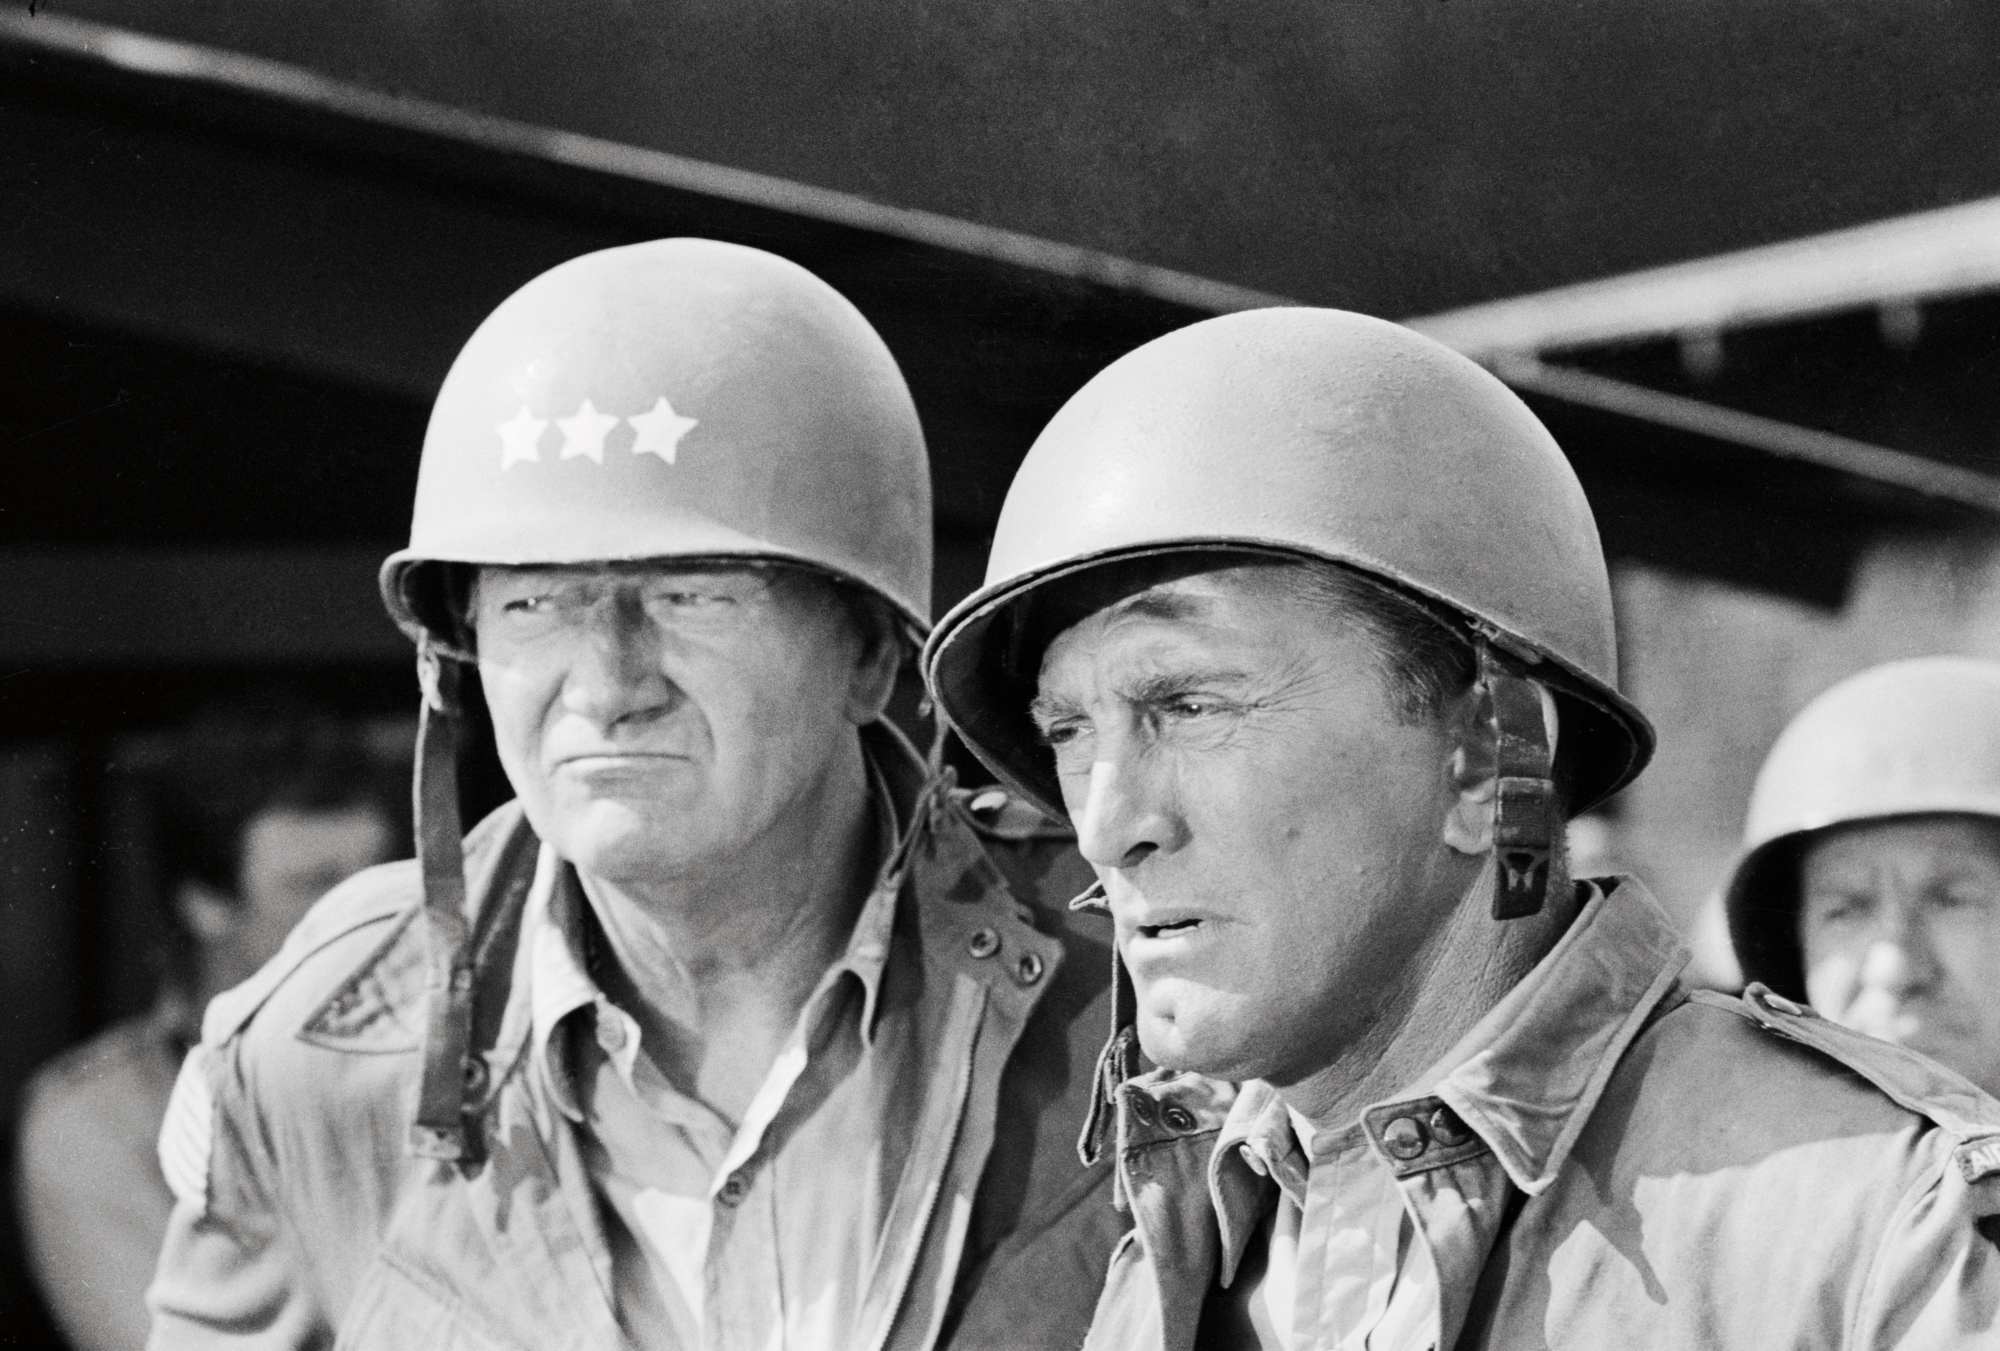 'Cast a Giant Shadow' John Wayne as U.S. General Randolph and Kirk Douglas, as Kirk Douglas, as U.S. Colonel David Marcus in a black-and-white picture. They're wearing military uniforms, looking upset.